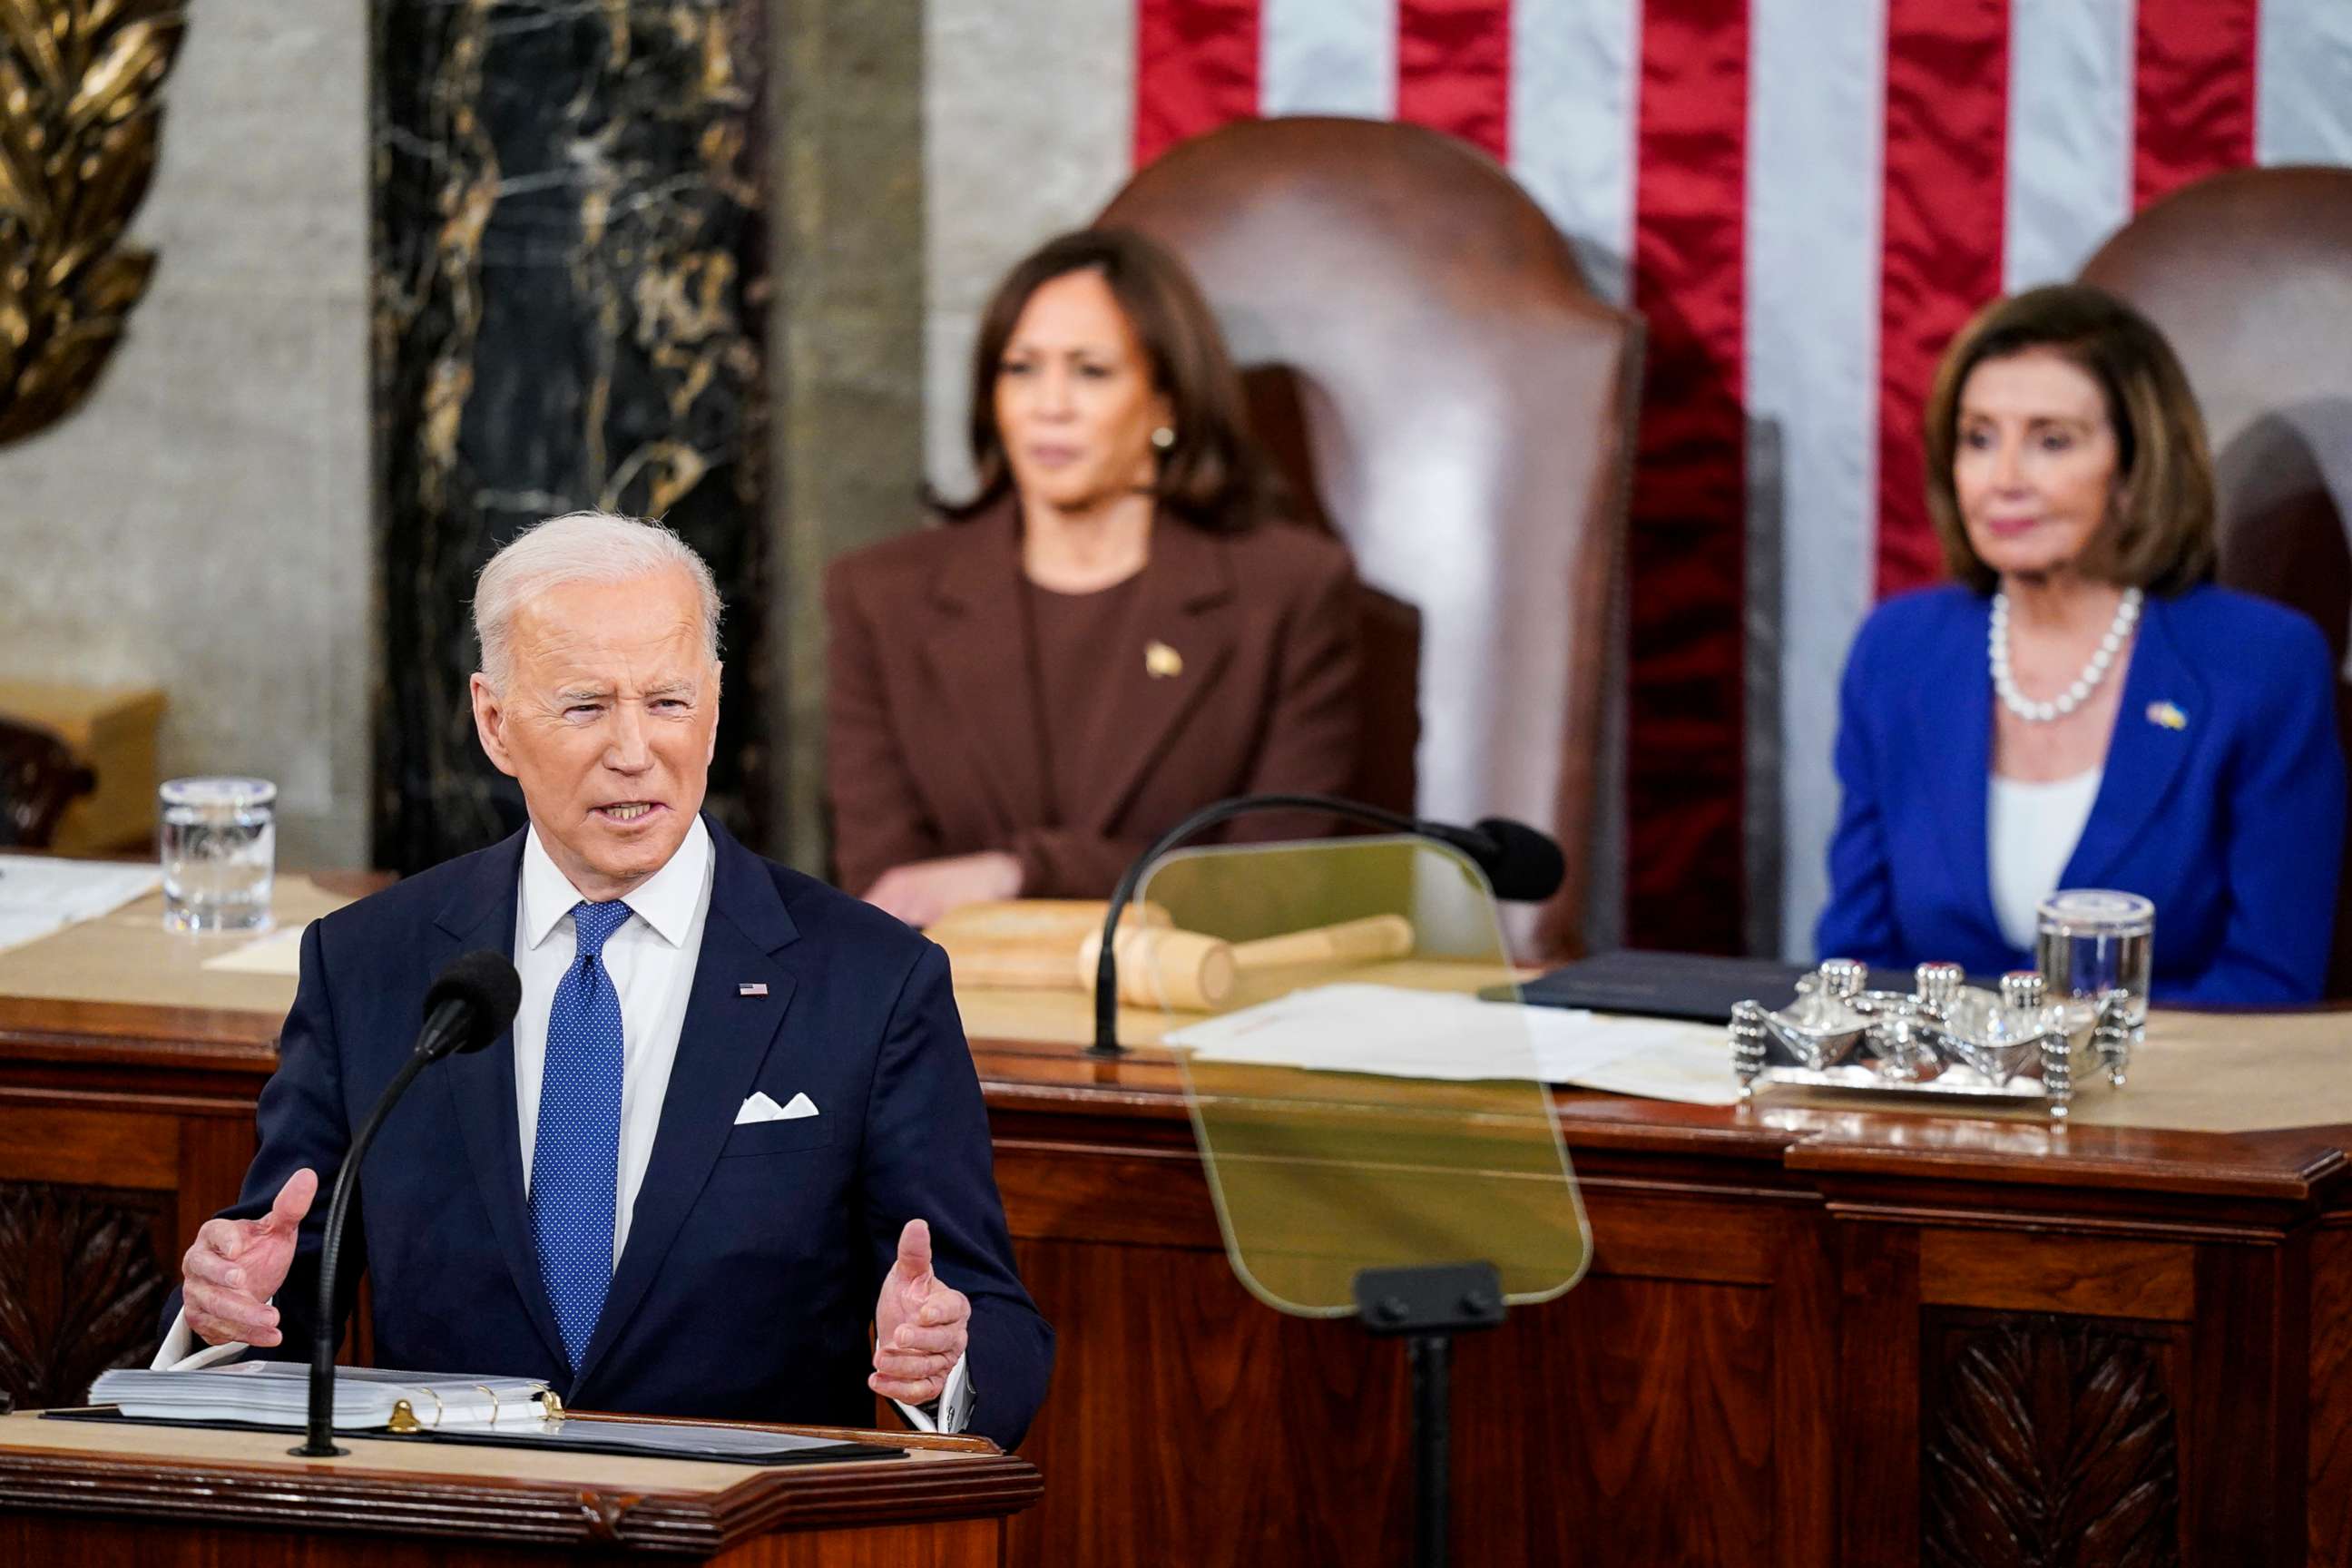 PHOTO: President Joe Biden delivers the State of the Union address flanked by Vice President Kamala Harris and House Speaker Nancy Pelosi during a joint session of Congress at the U.S. Capitol on March 1, 2022, in Washington, D.C.